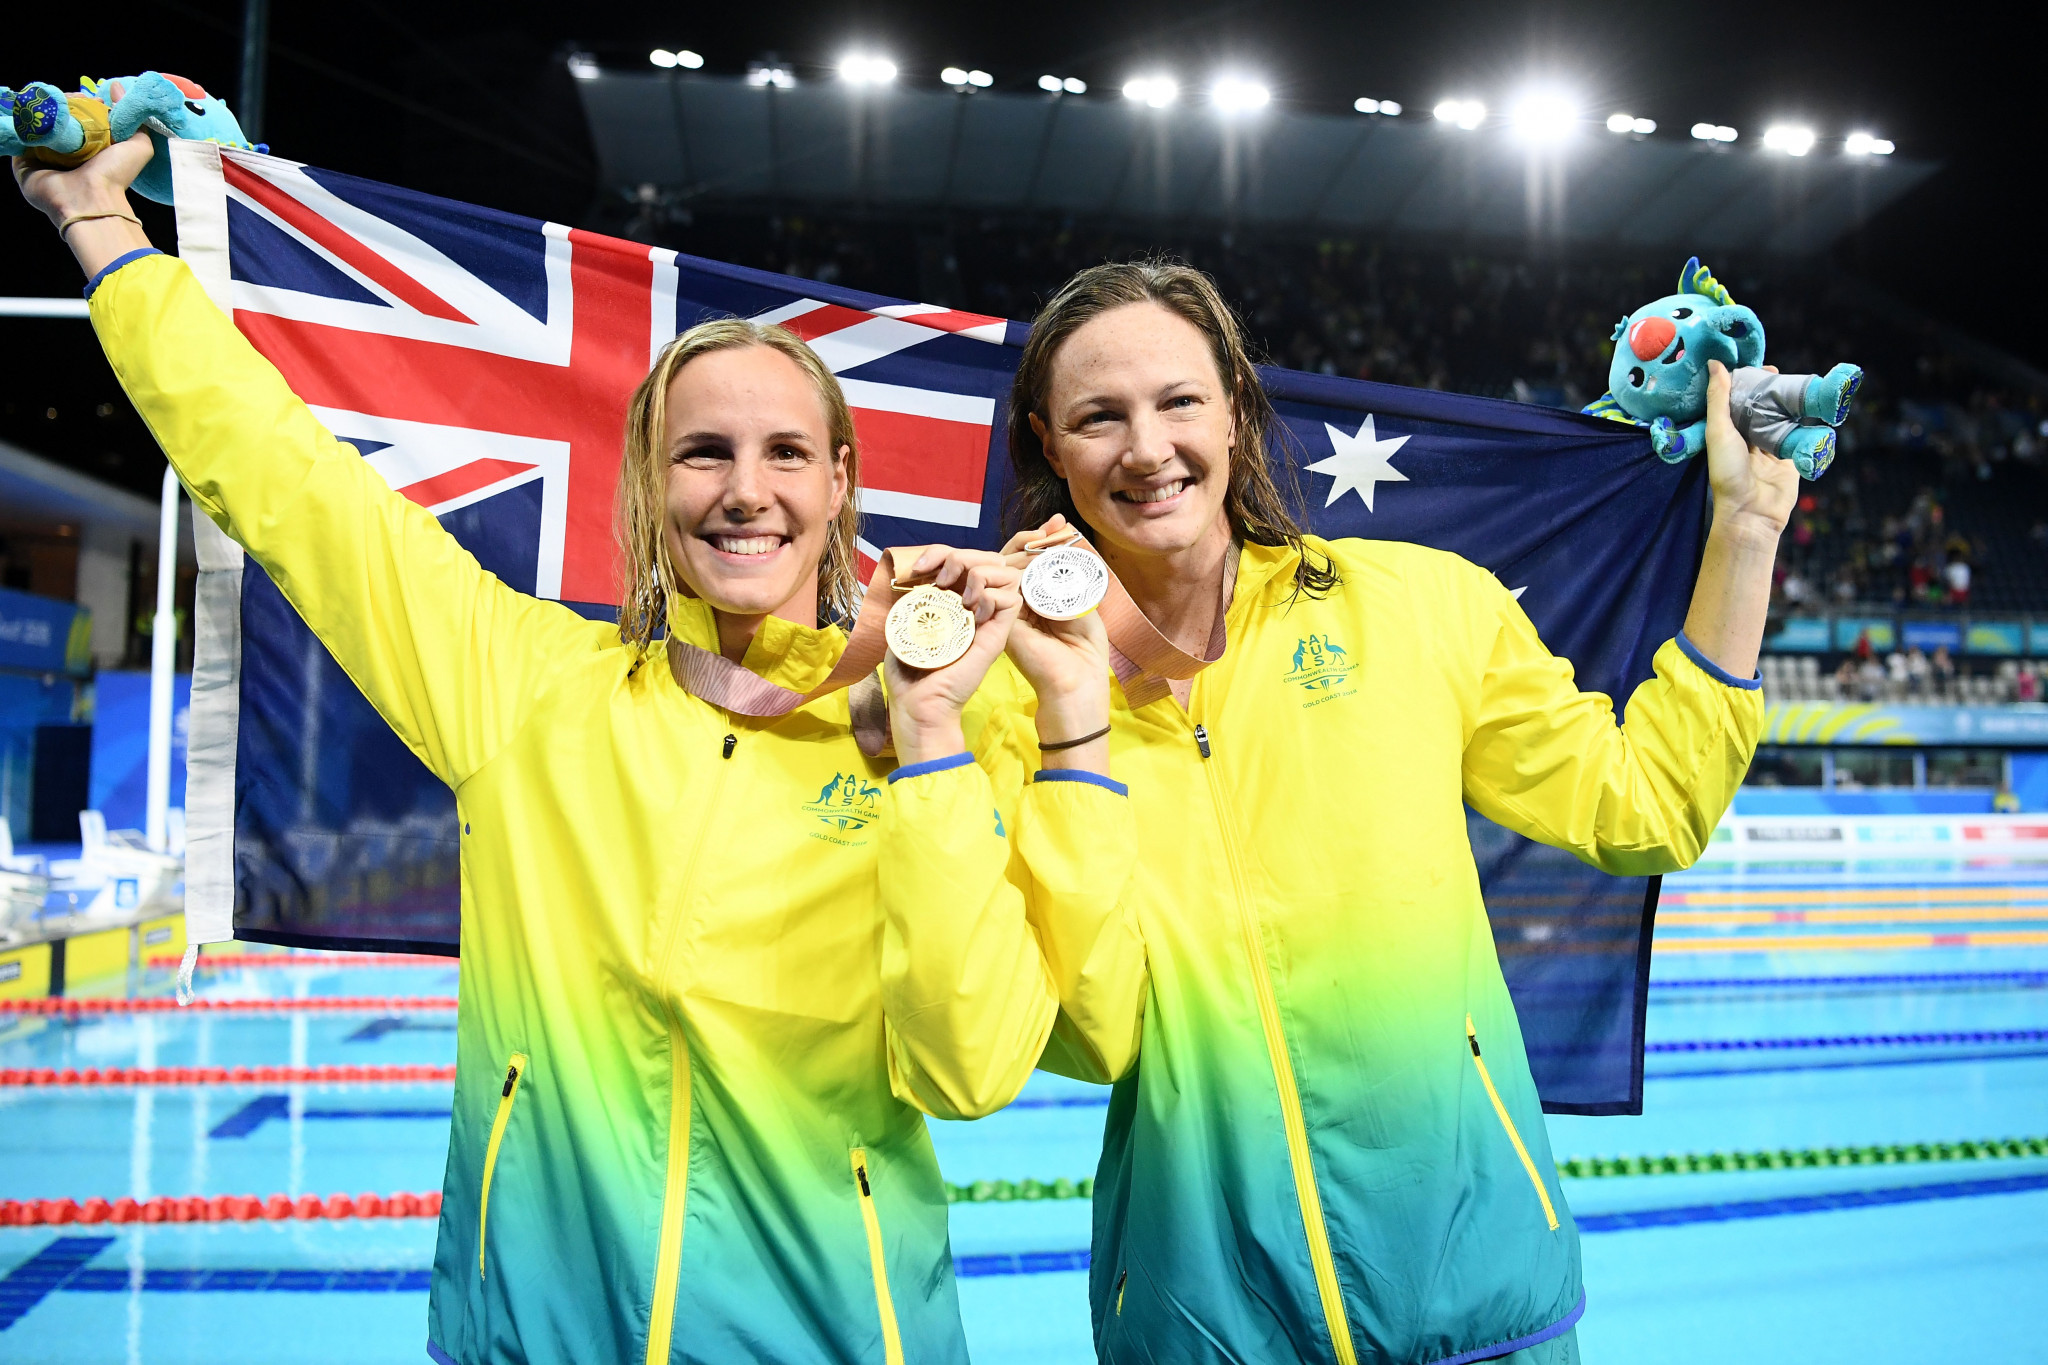 Bronte Campbell beat sister Cate to win the women's 100m freestyle gold ©Getty Images